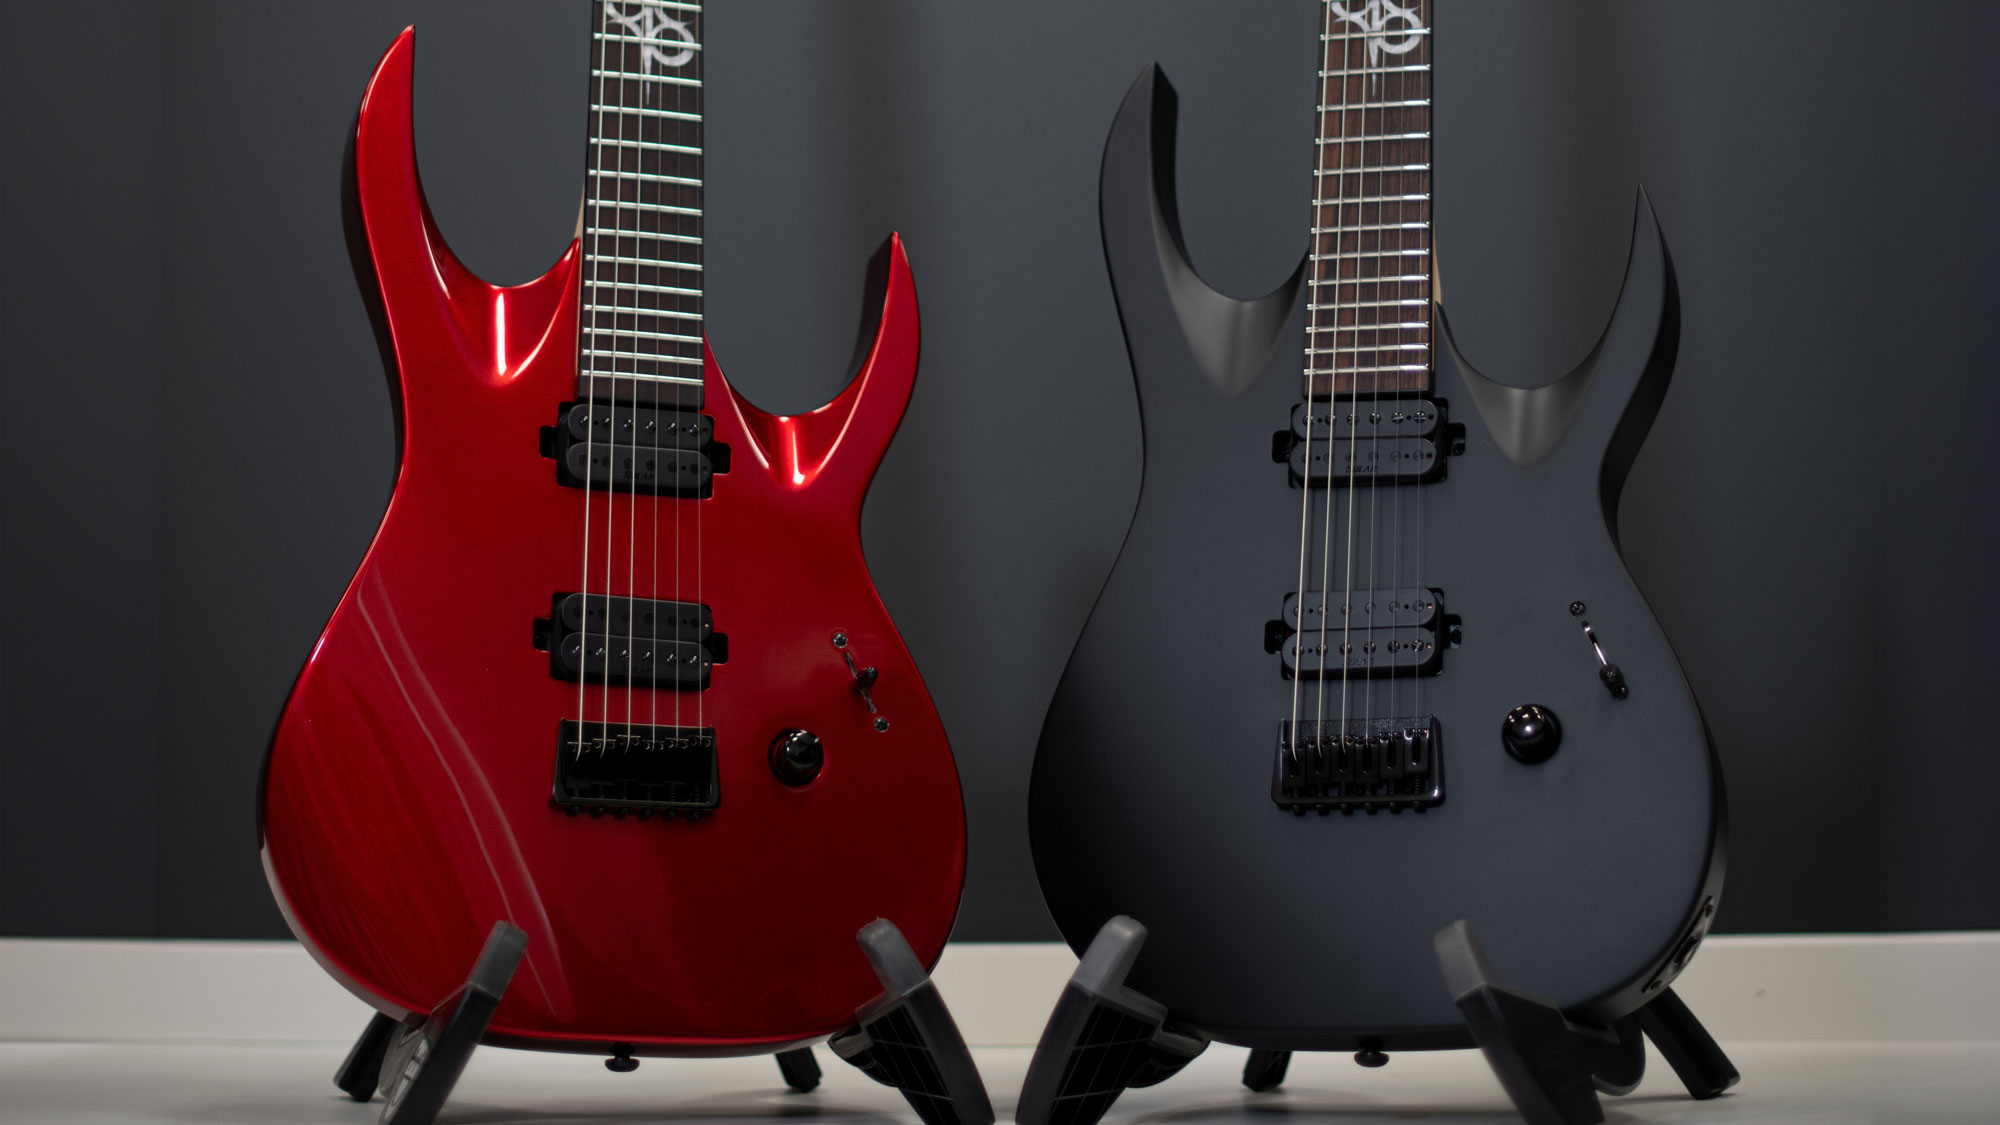 “Enhanced features at more affordable prices”: Solar Guitars brings premium metal guitar specs to new $599 lineup